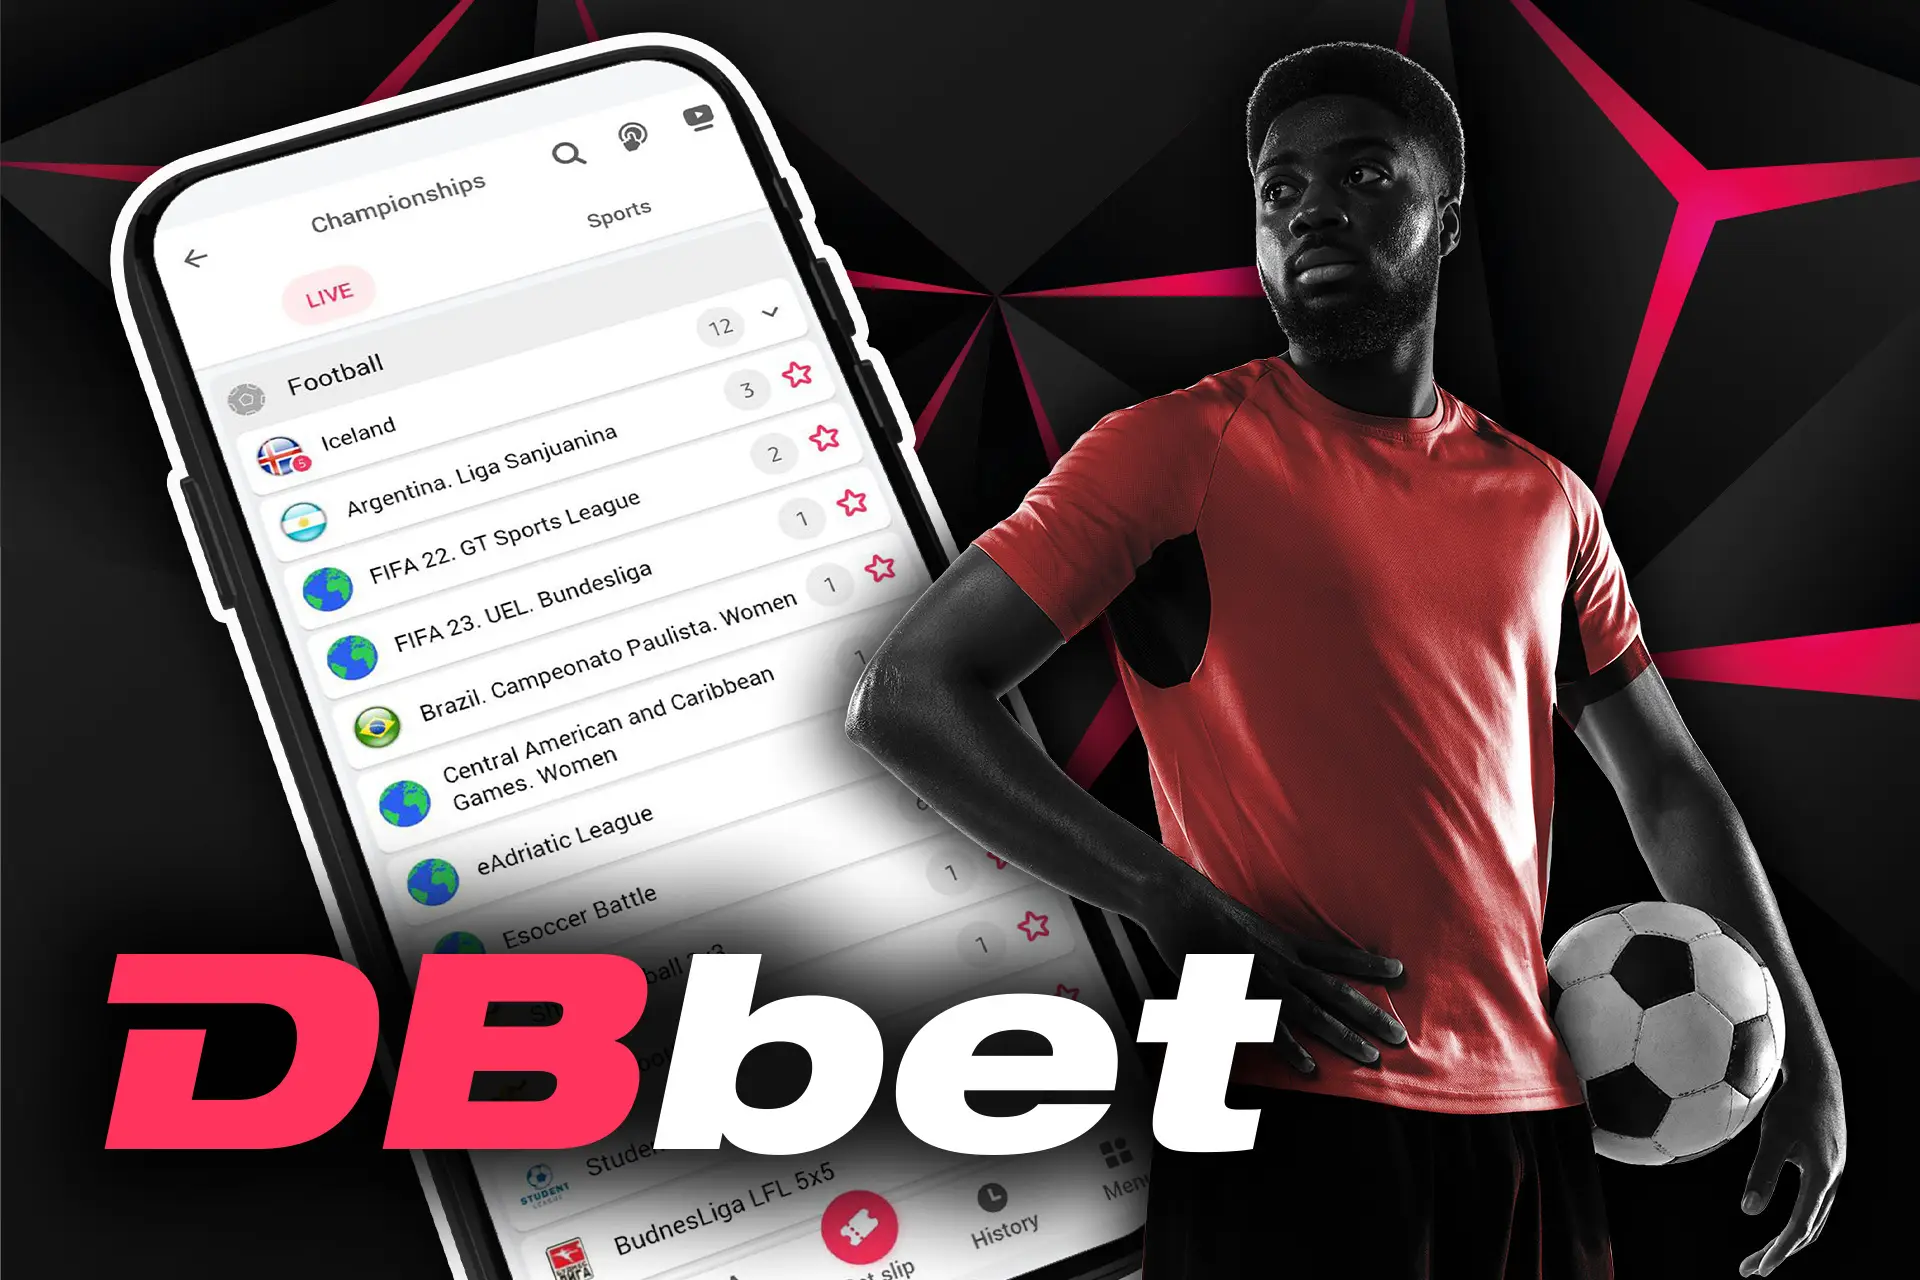 Bet on football in the DBbet app.